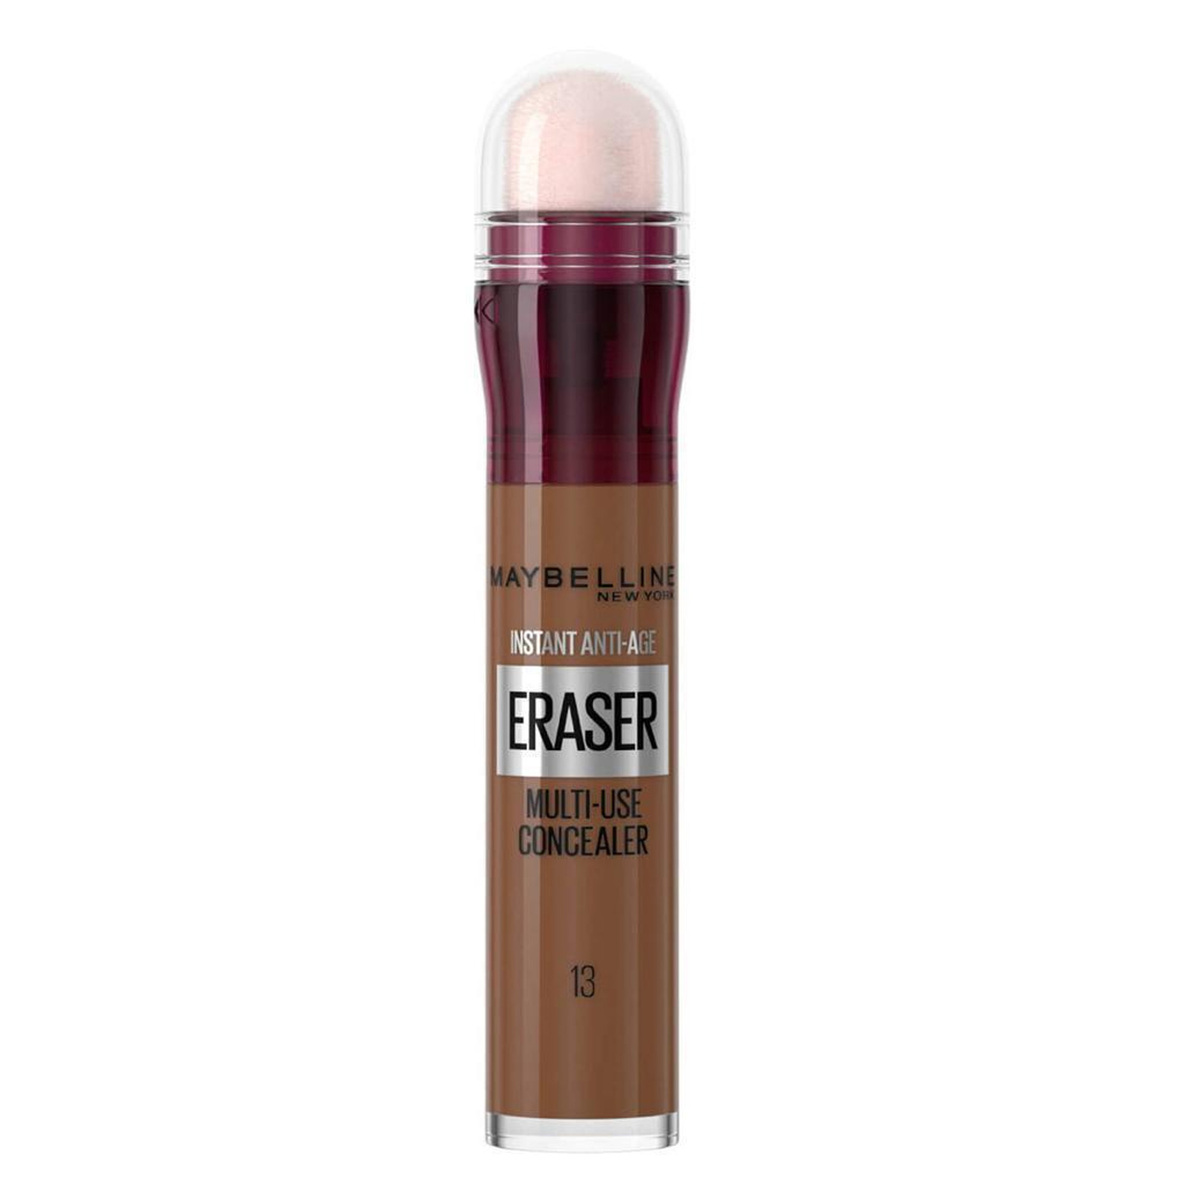 Maybelline New York Instant Anti-Age Eraser Concealer Cocoa 13 1 pc